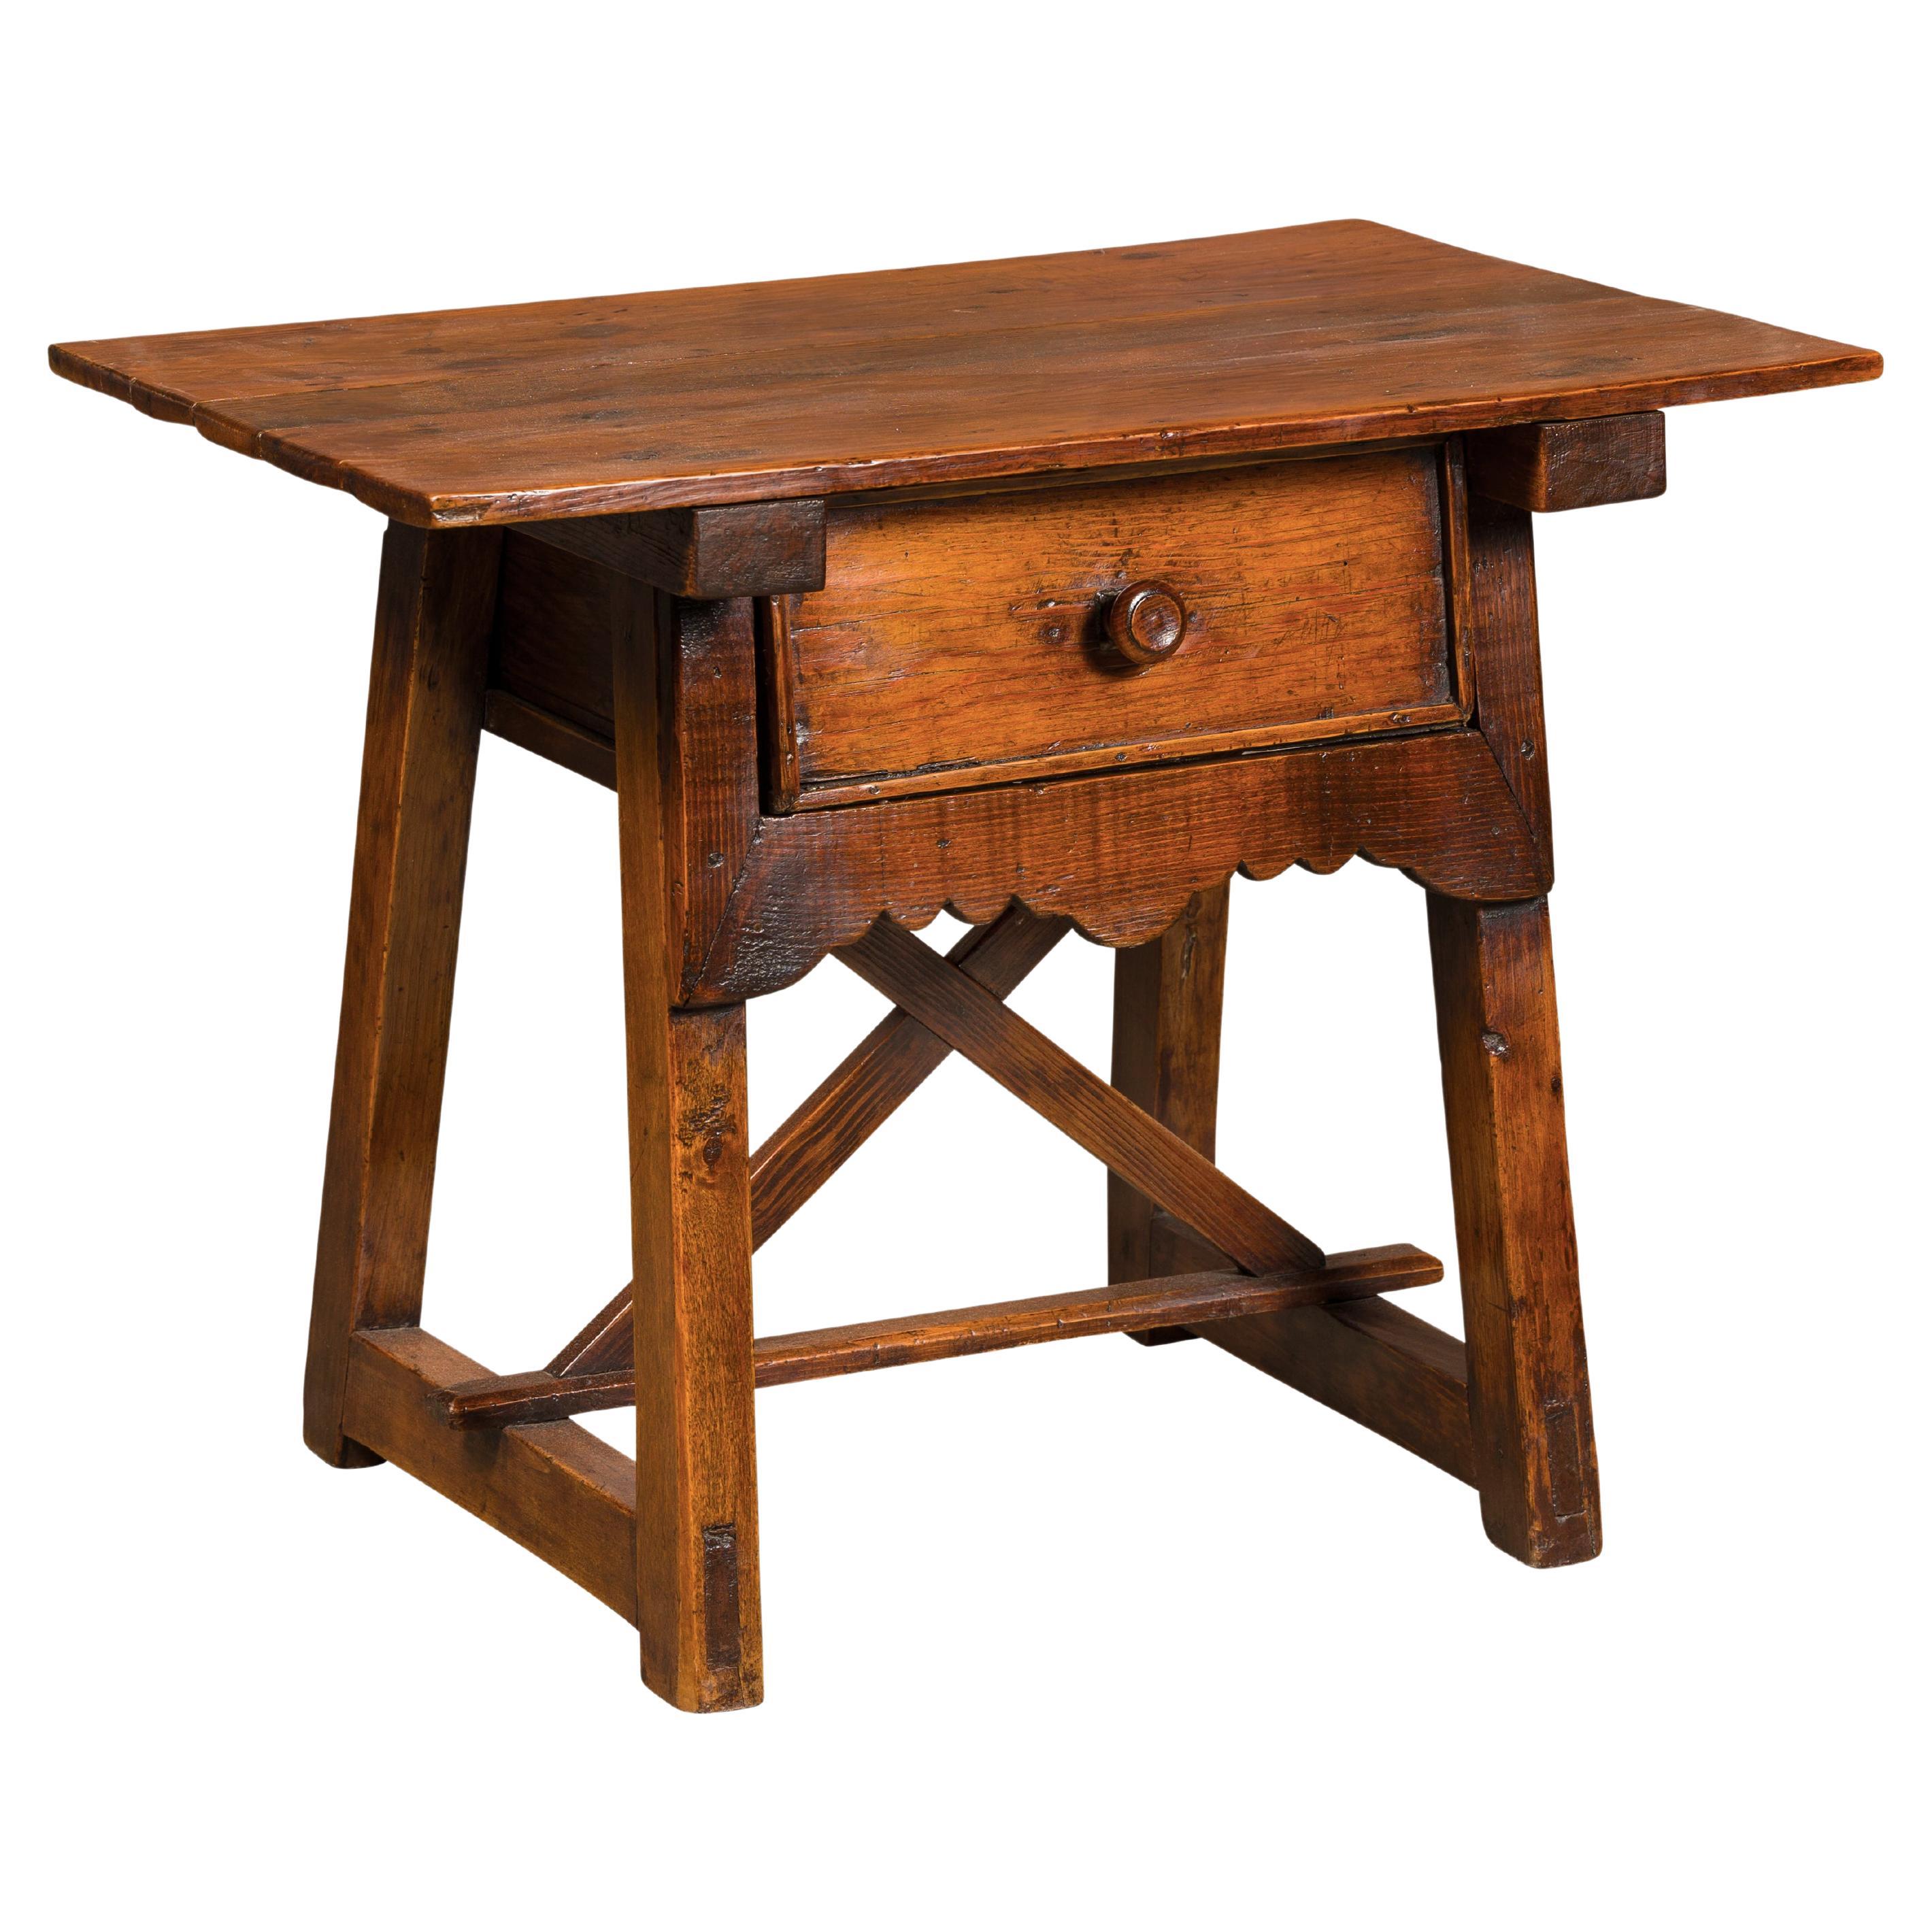 19th Century English Oak Low Side Table with Single Drawer and Carved Apron